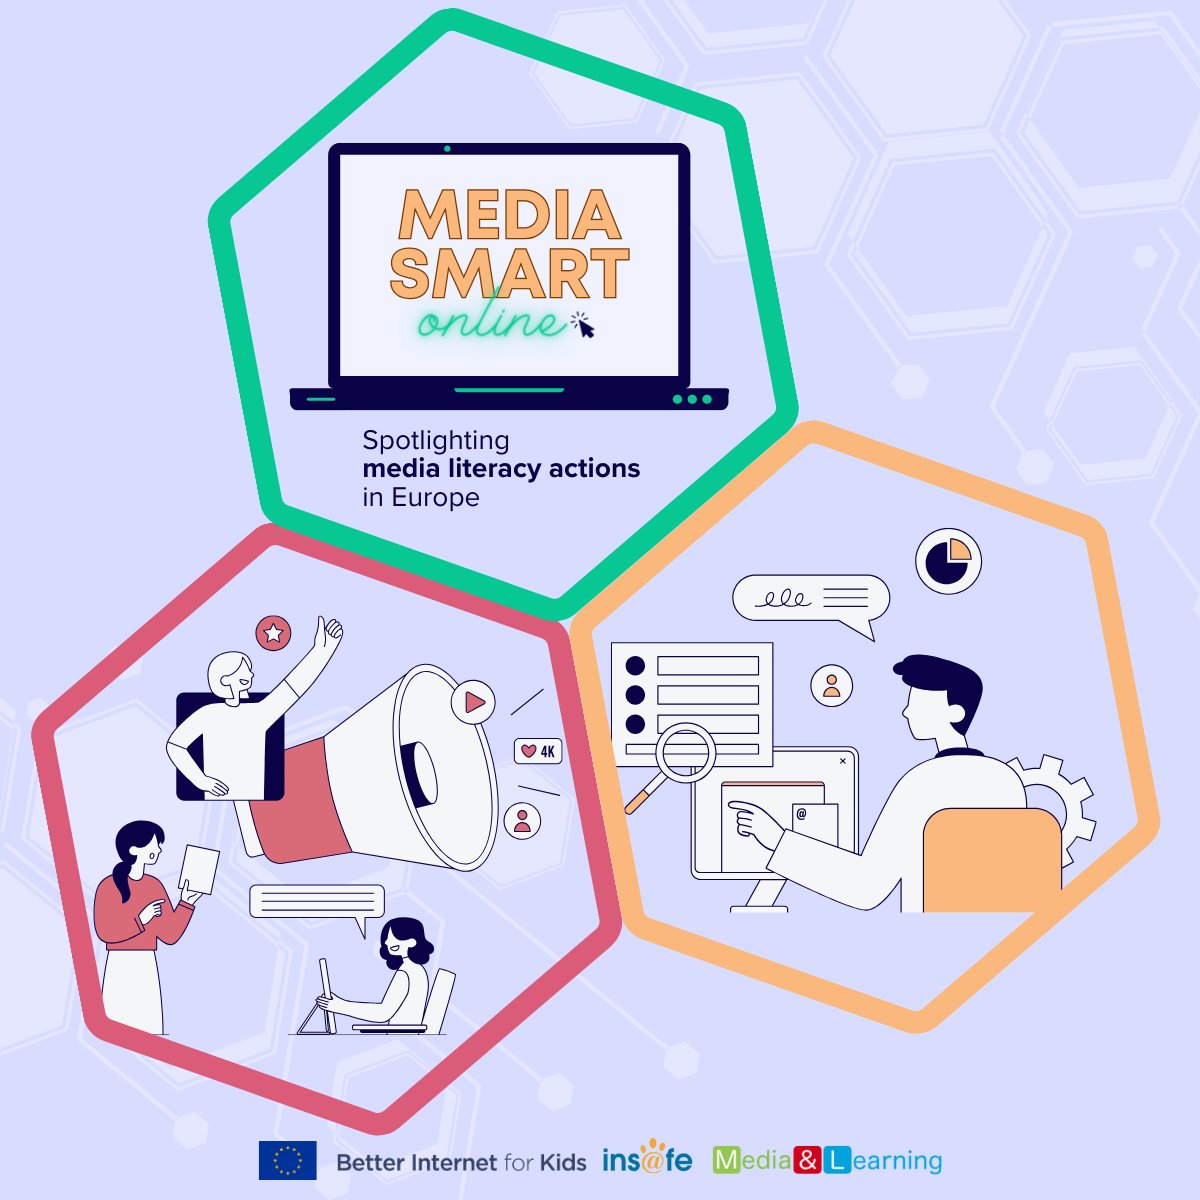 📚✅Interest in #MediaLiteracy is on the rise as a result of the fight against #disinformation... 🤔Did you know that there are a number of resources available to counteract this? @Insafenetwork and @MediaLearning have mapped them: bit.ly/49ZzX3c #MediaSmartOnline